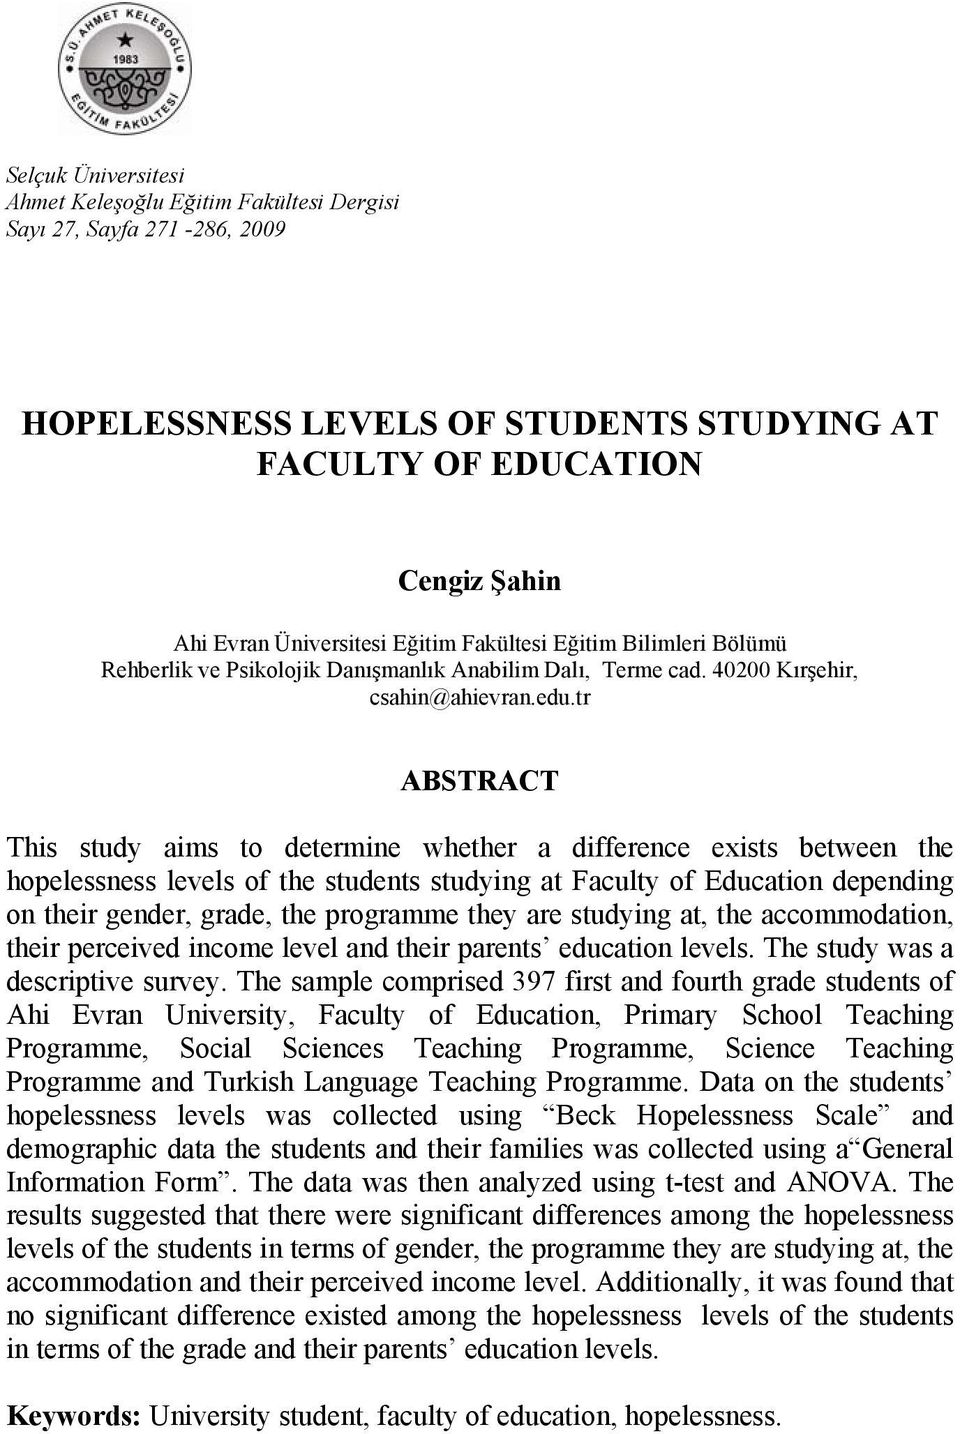 tr ABSTRACT This study aims to determine whether a difference exists between the hopelessness levels of the students studying at Faculty of Education depending on their gender, grade, the programme